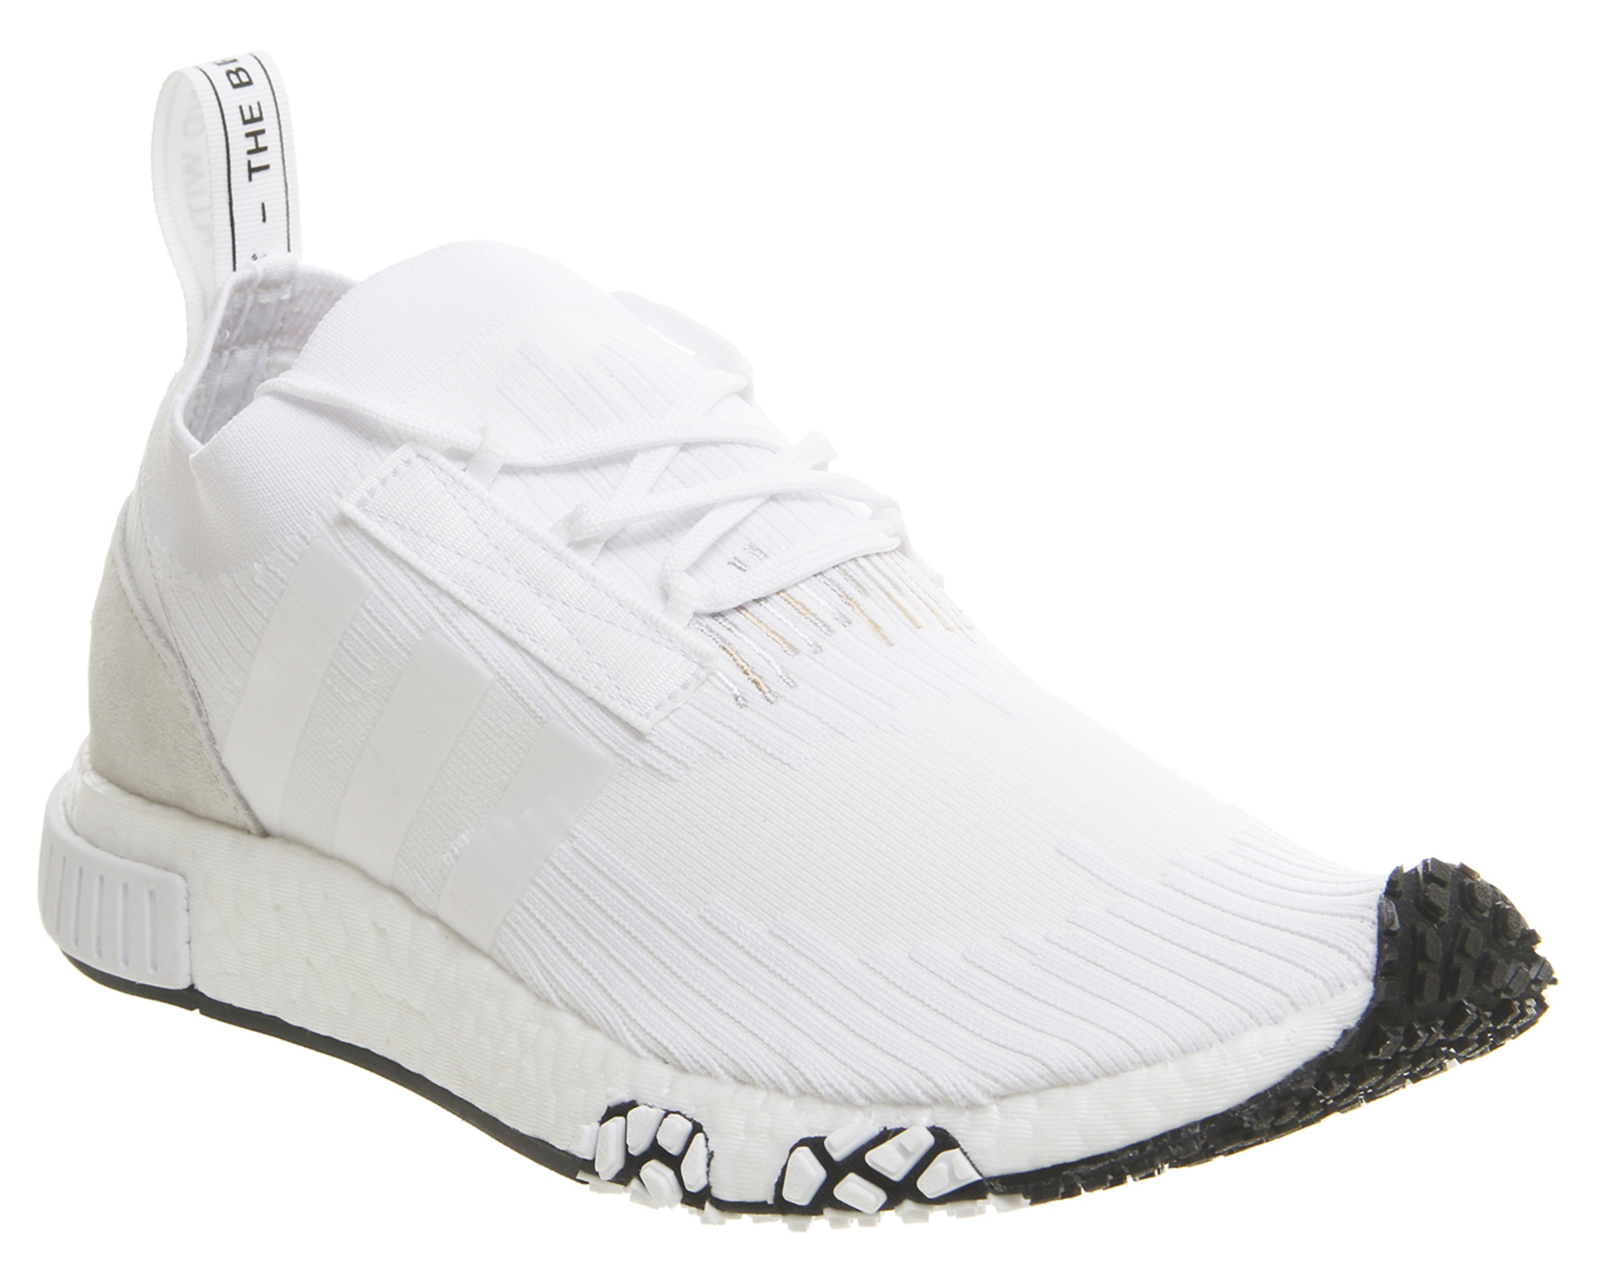 nmd racer primeknit trainers